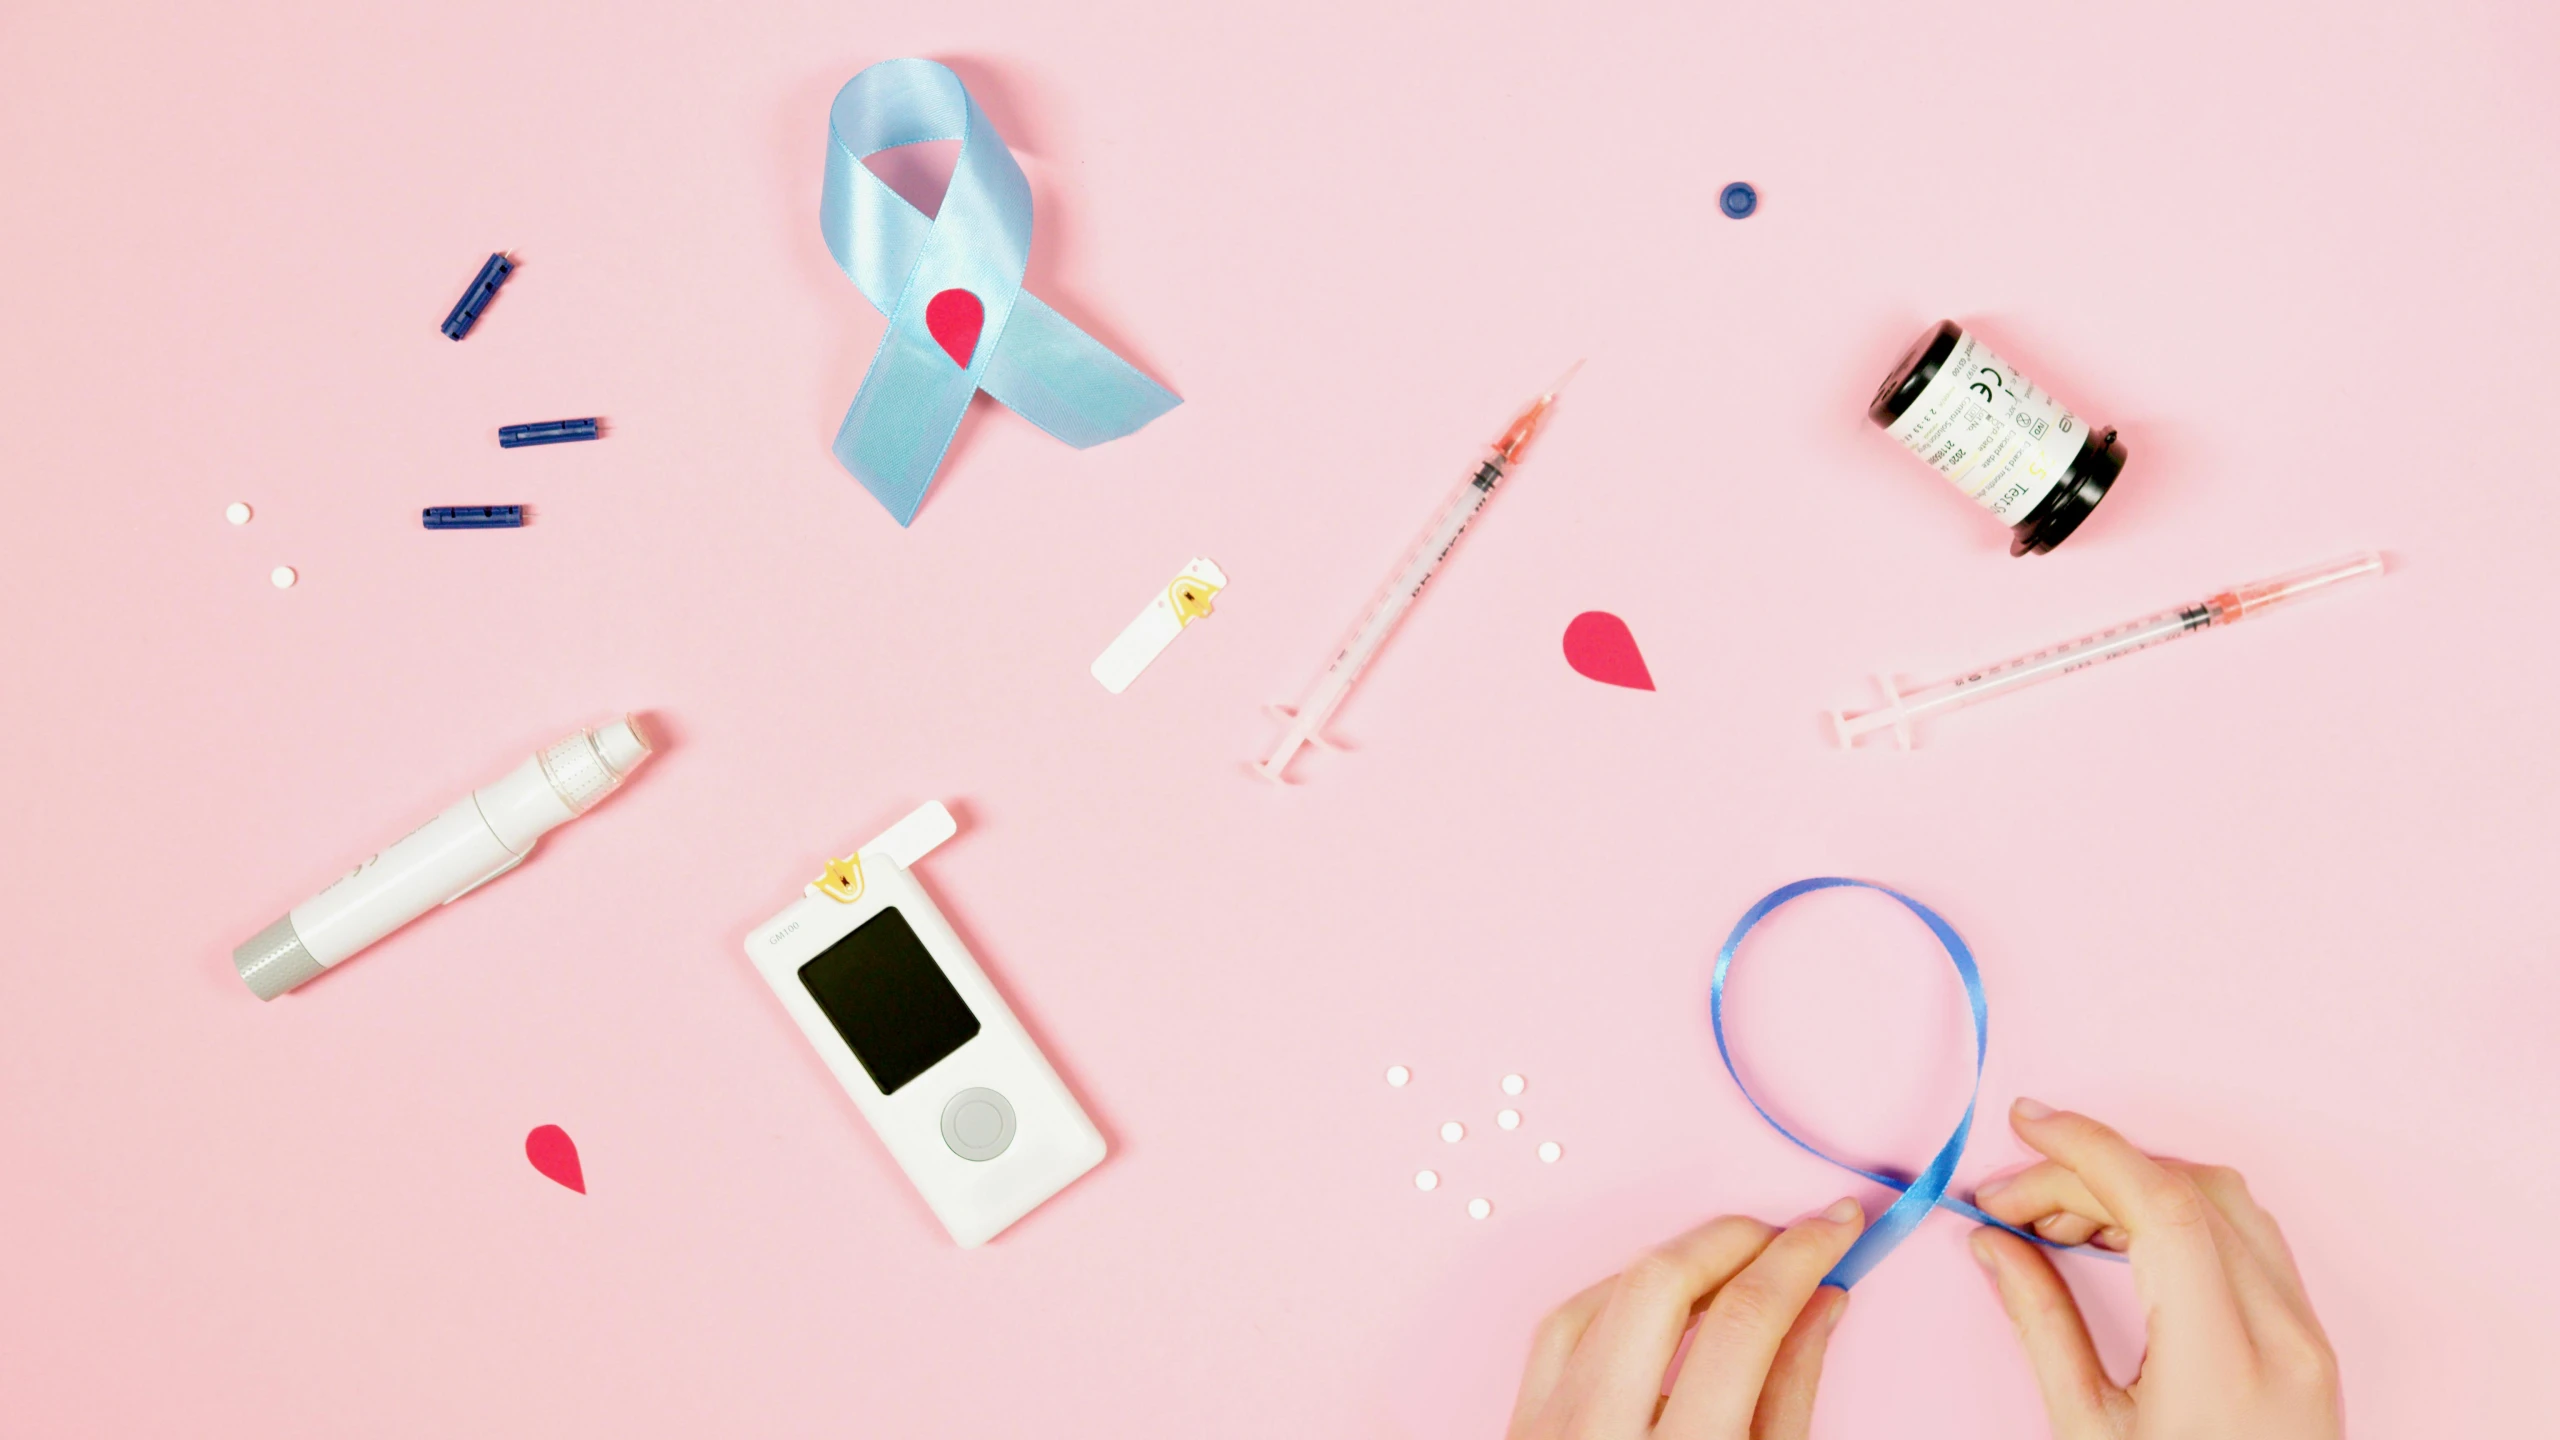 a person cutting a ribbon with scissors on a pink surface, a picture, by Julia Pishtar, trending on pexels, antipodeans, pills and medicine, with an iv drip, karim rashid, various items